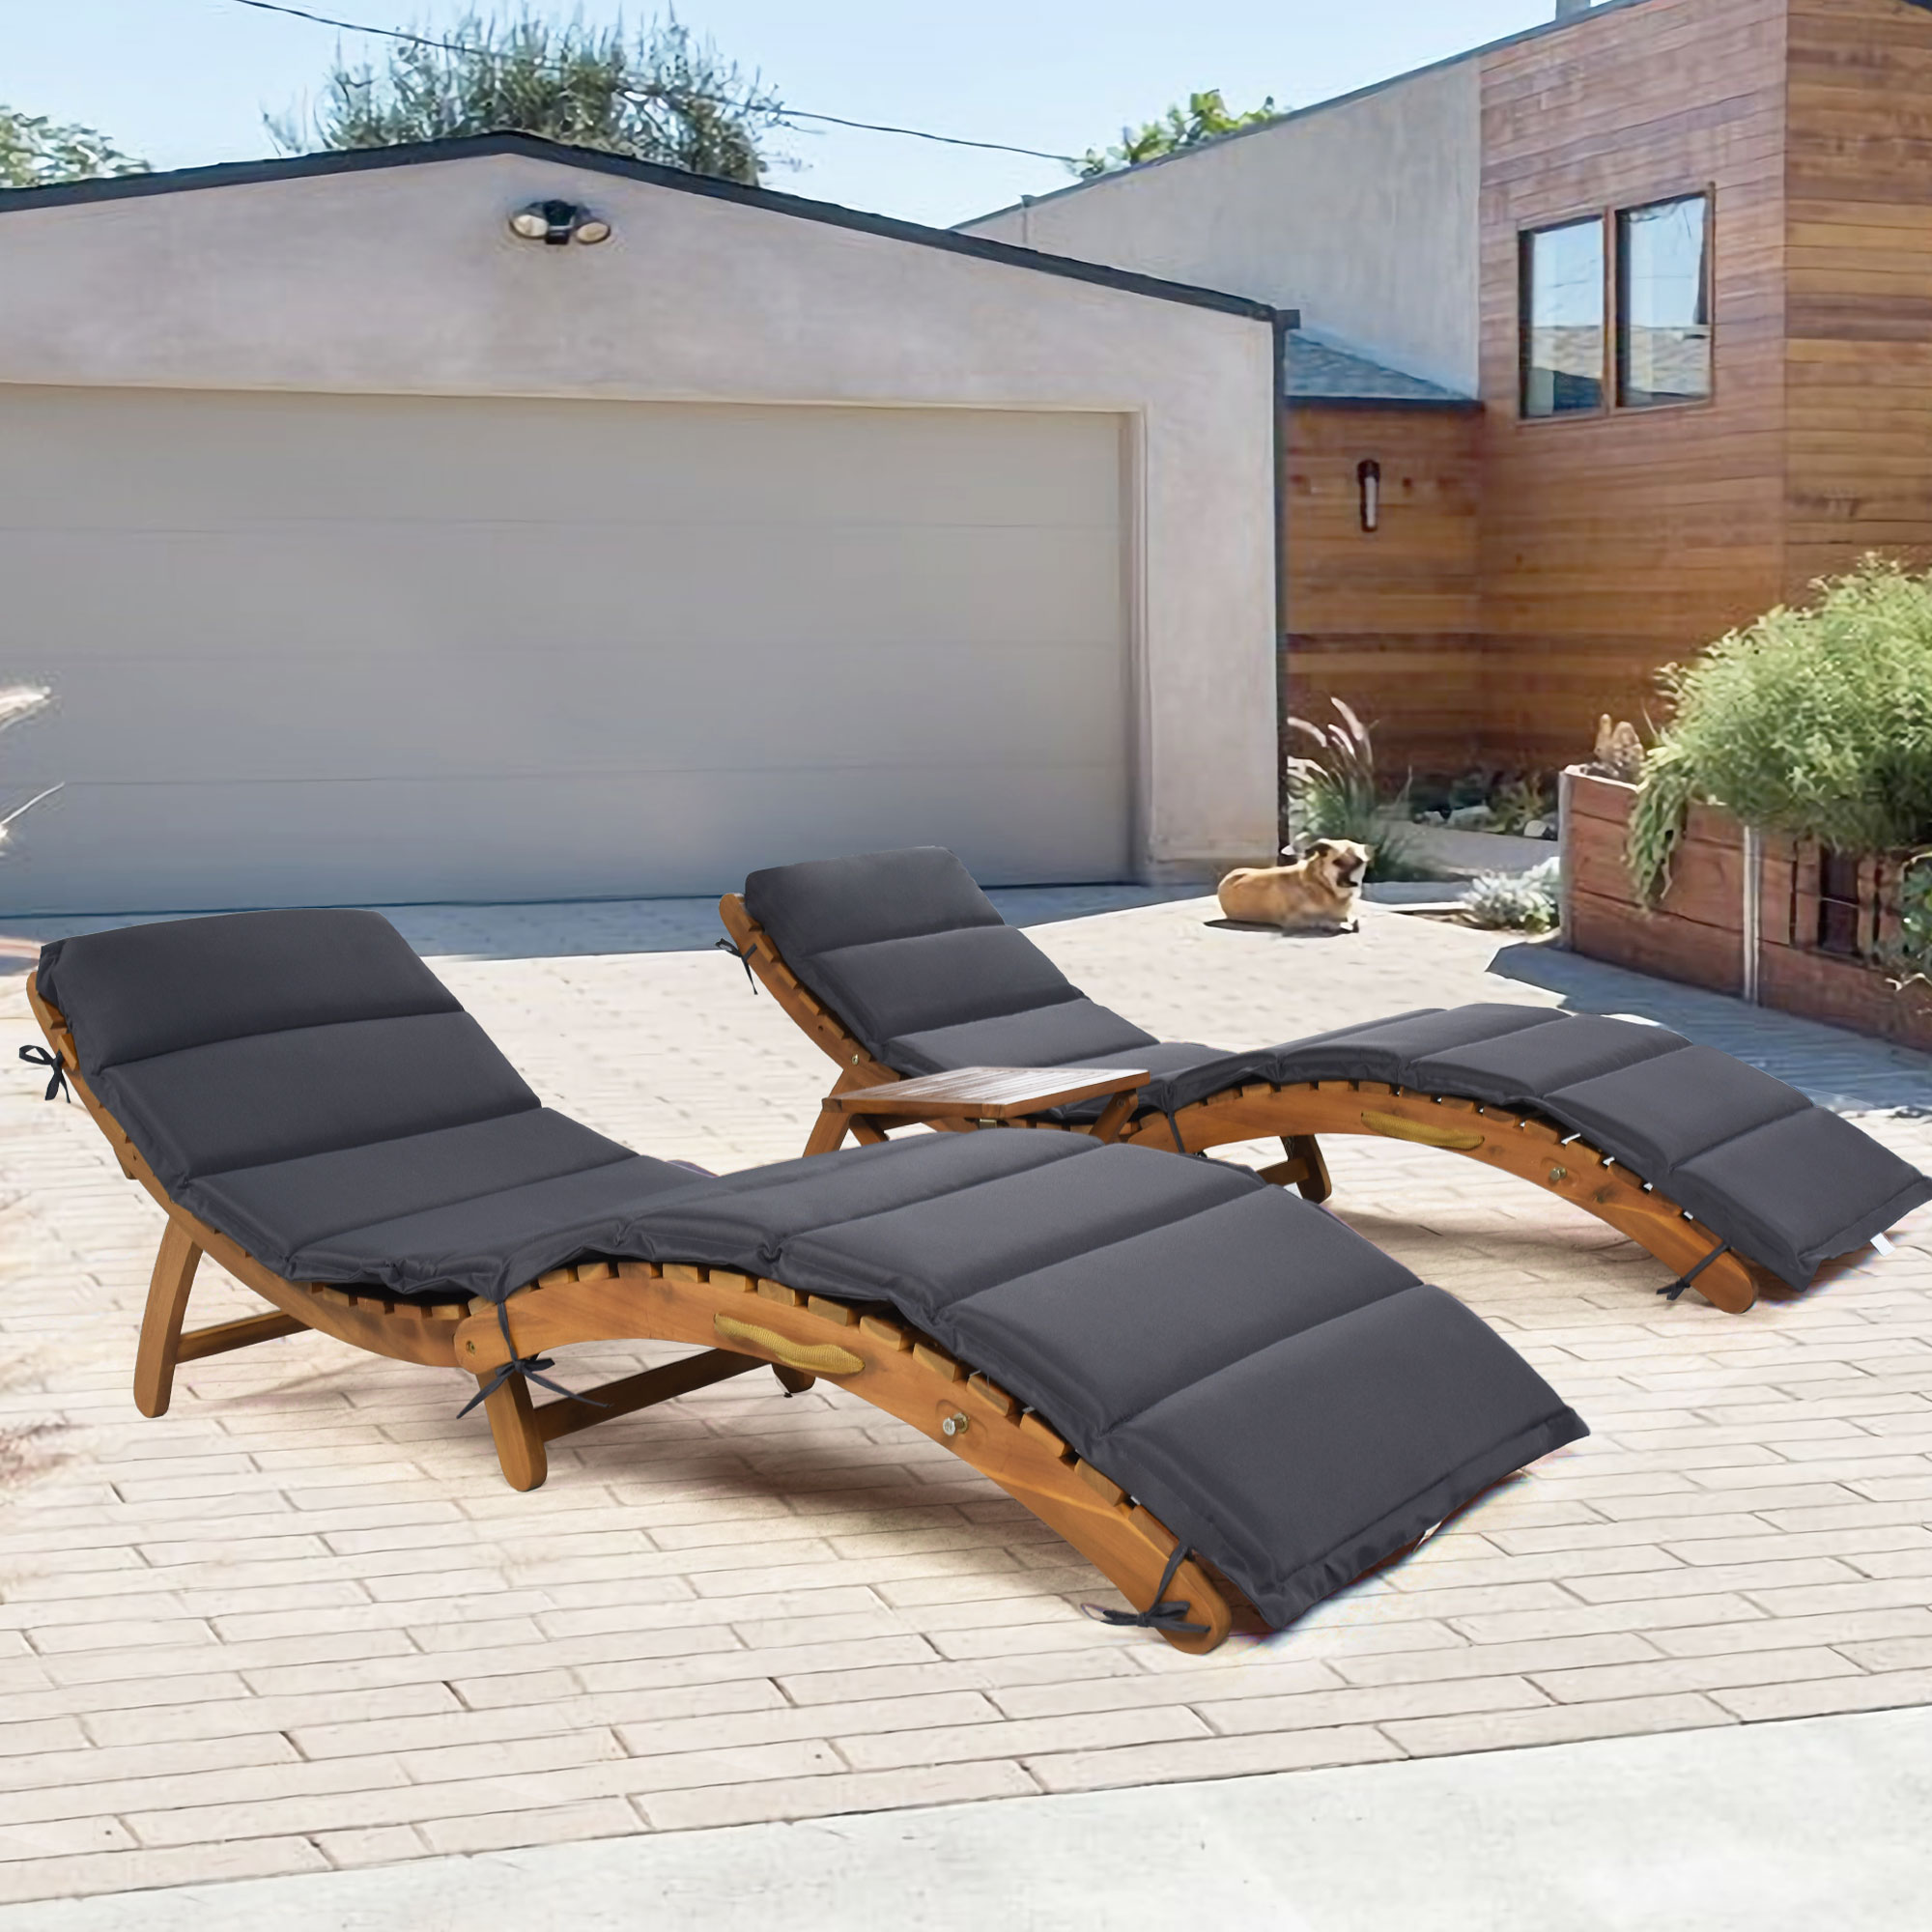 ENYOPRO Patio Lounge Chairs Set of 3, Outdoor Wood Portable Chaise Lounge Chairs with Foldable Tea Table and Cushions, Fit for Pool Porch Backyard Patio, Brown Finish + Dark Gray Cushion, K2702 - image 1 of 8